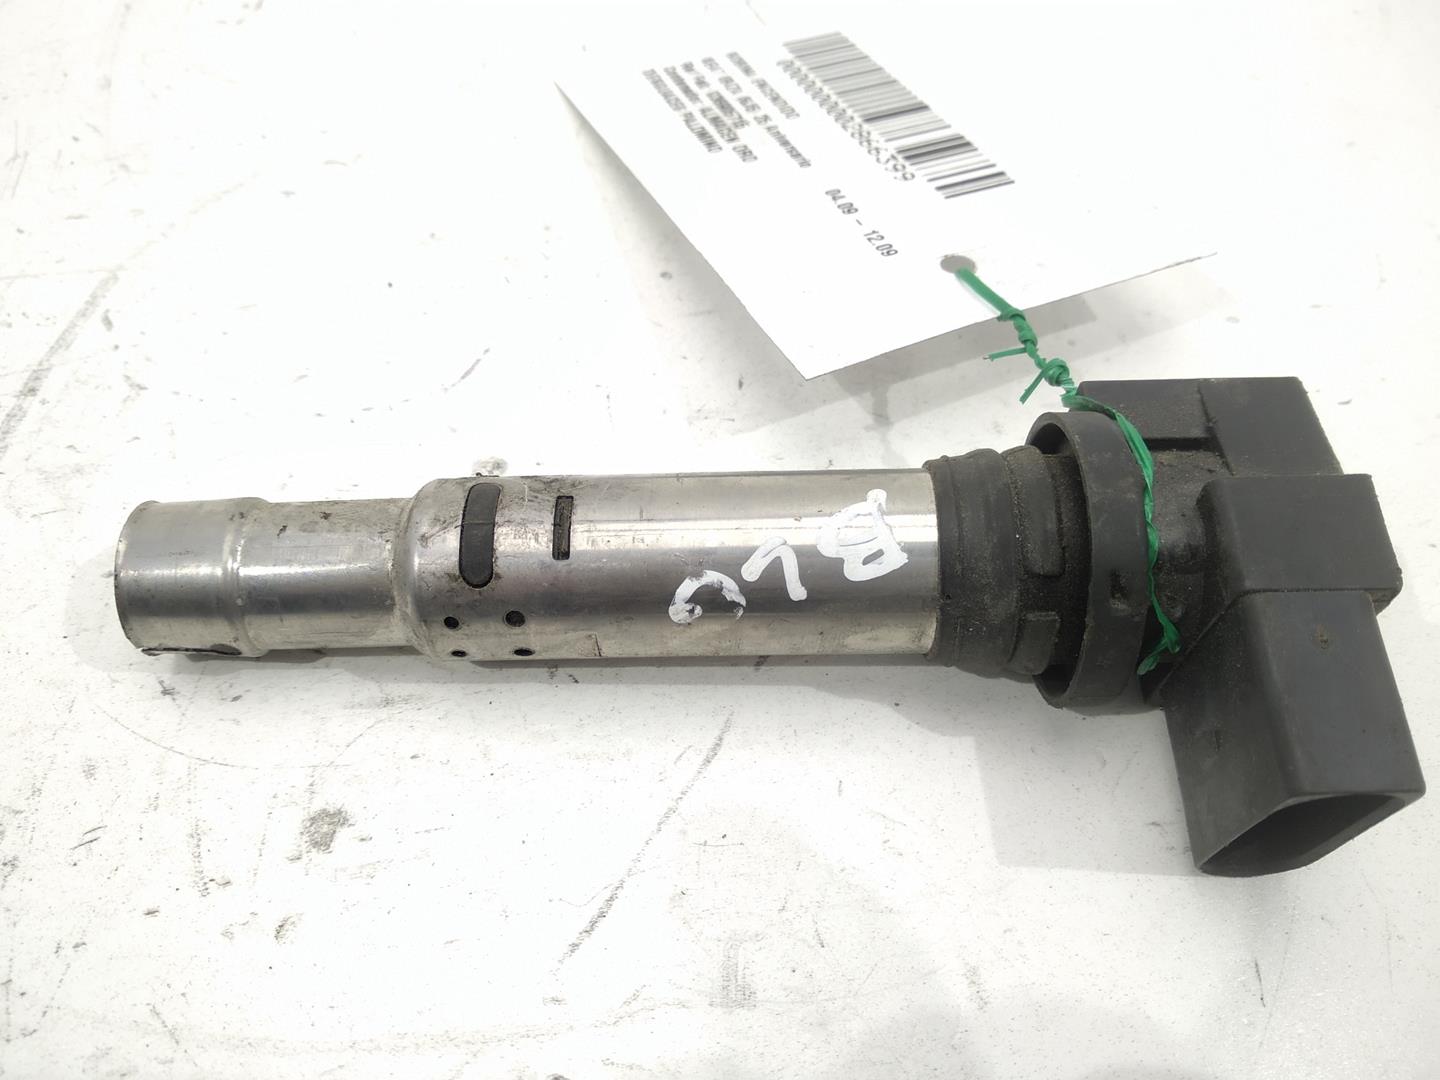 SEAT Ibiza 3 generation (2002-2008) High Voltage Ignition Coil 036905715, 036905715, 036905715 24512572